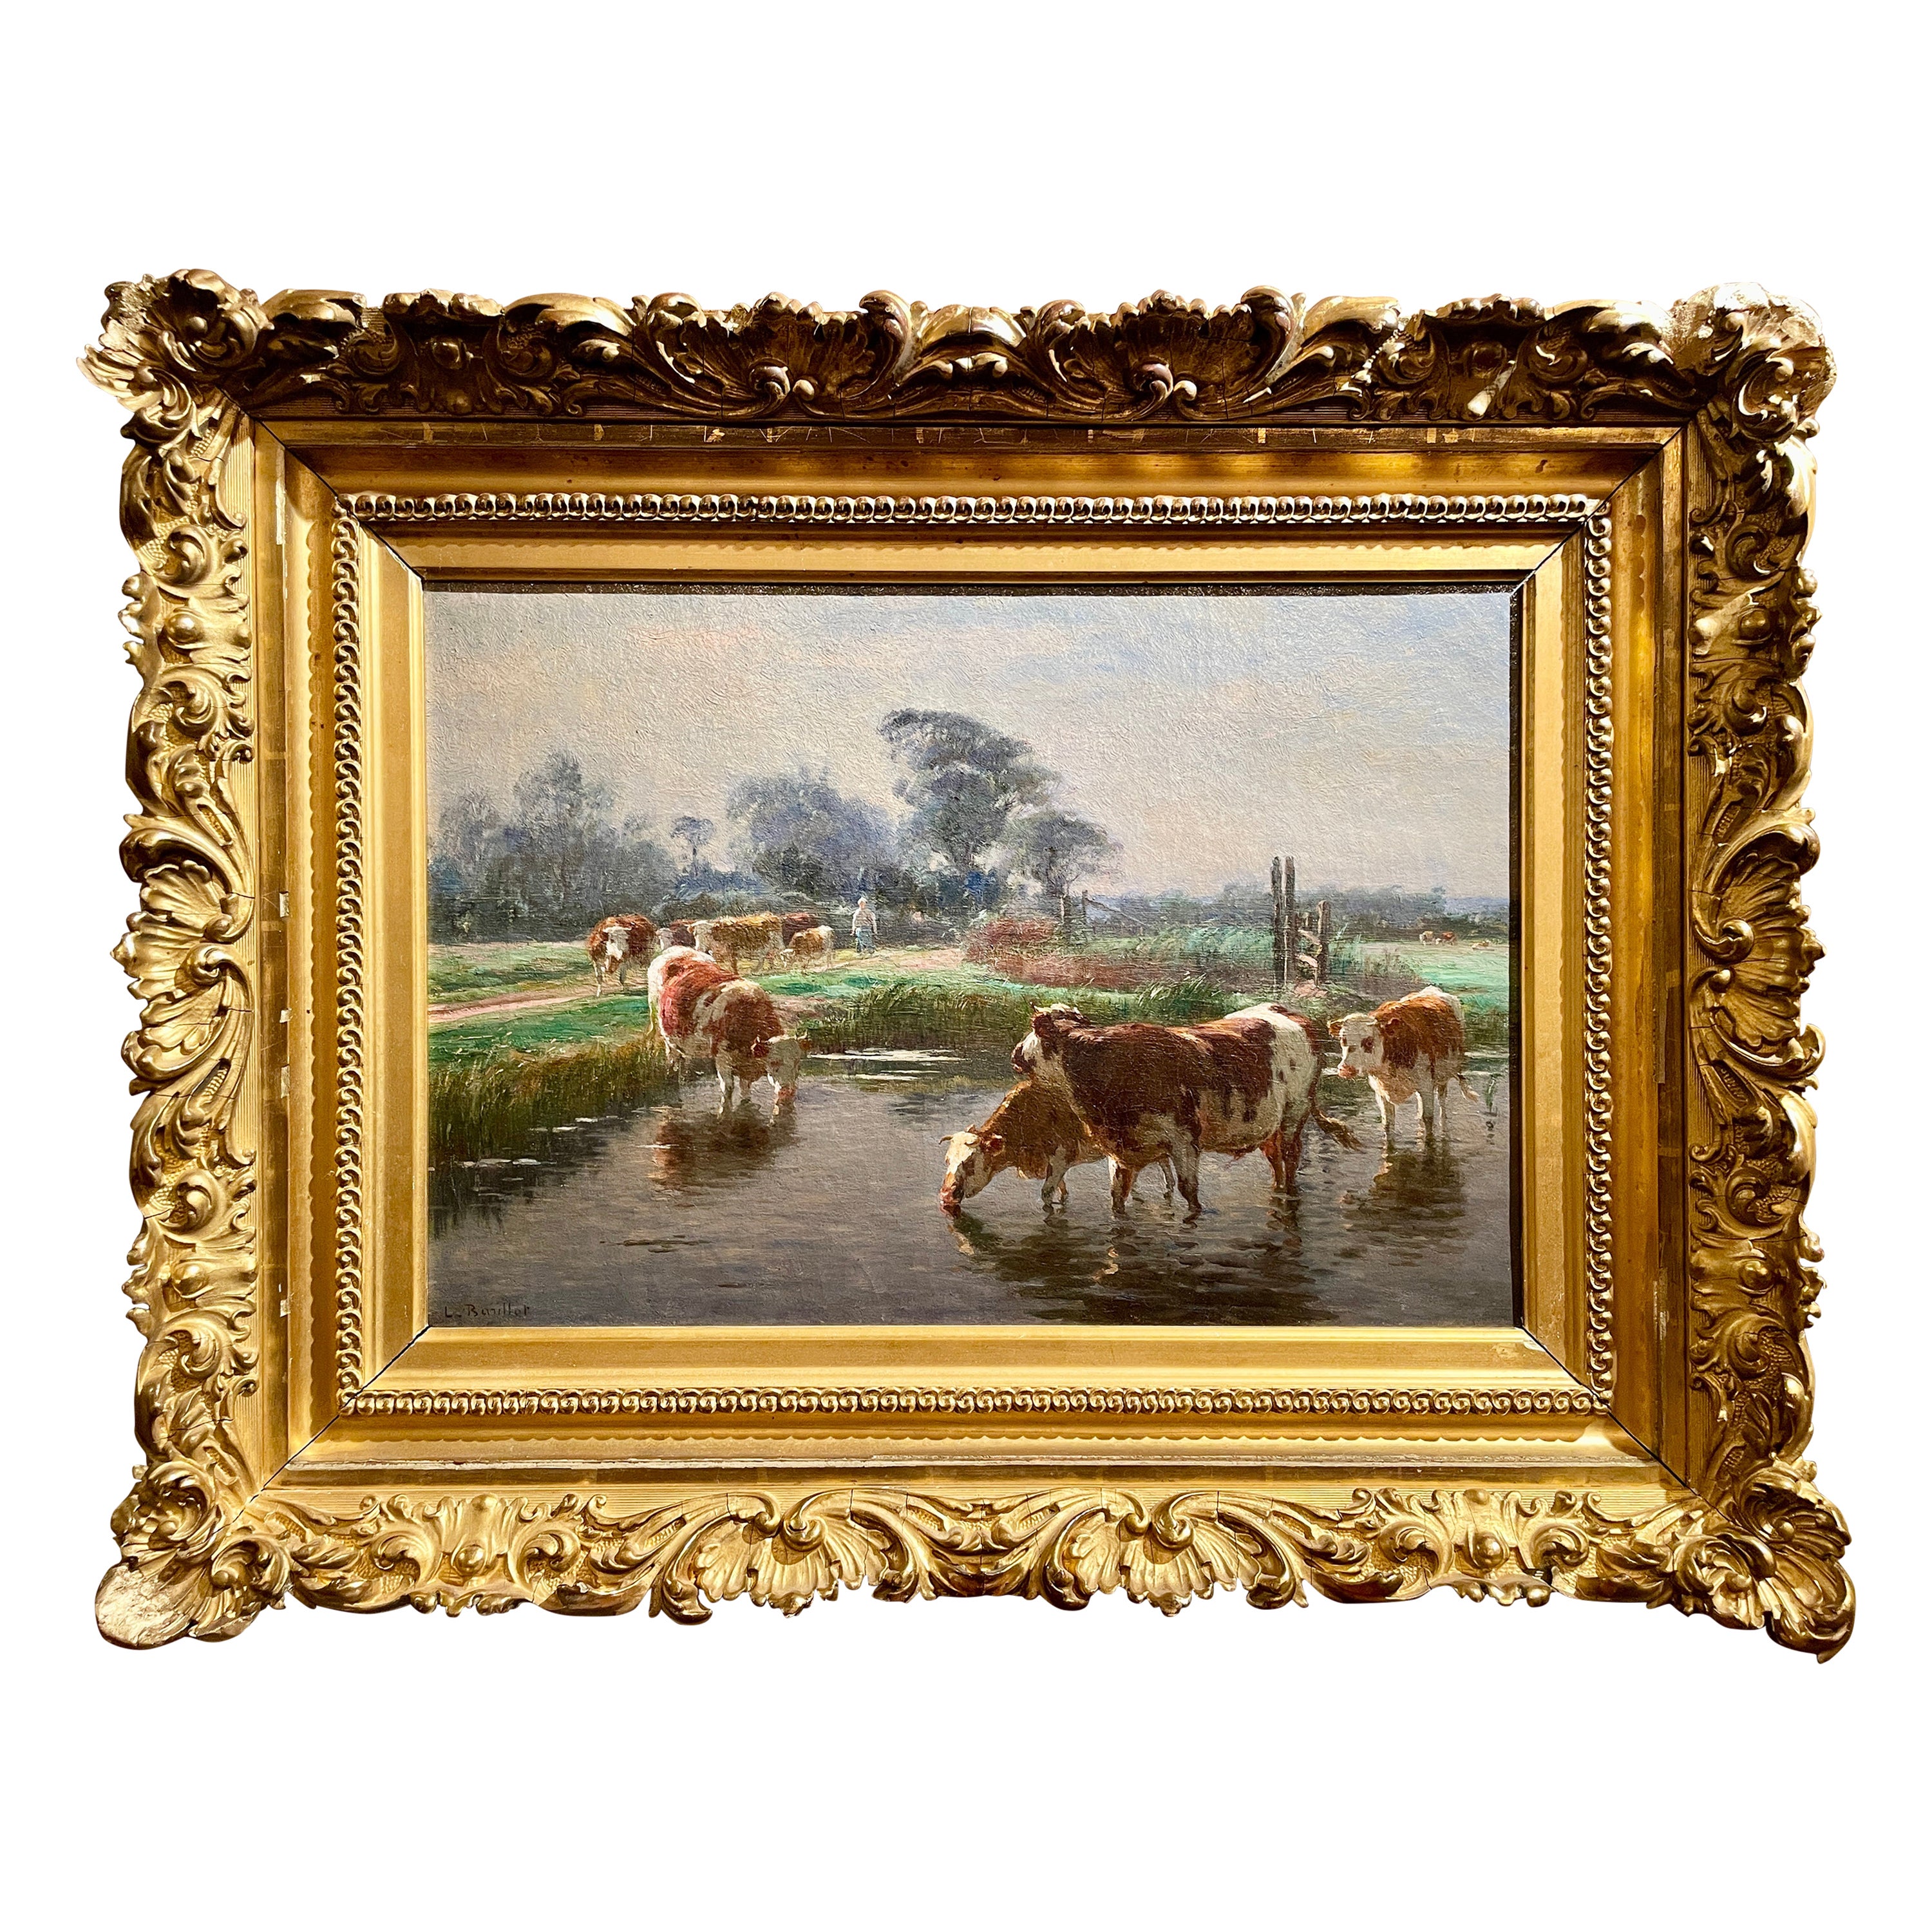 Antique French Oil on Canvas Landscape Painting Signed Léon Barillot, Circa 1890 For Sale